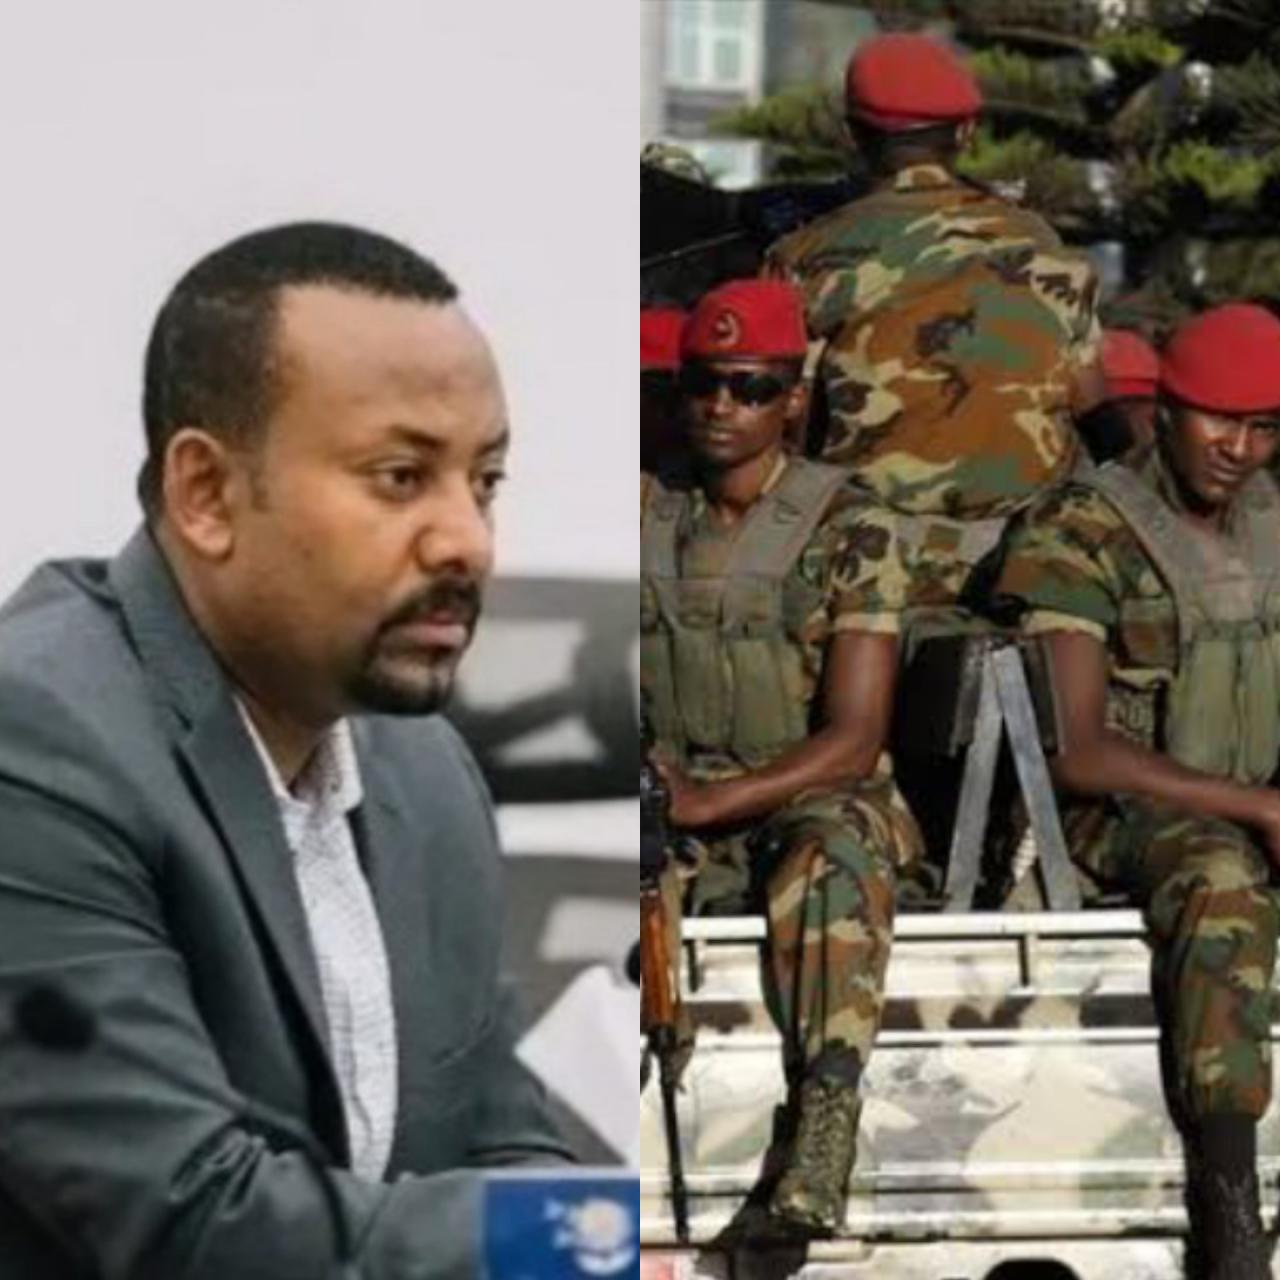 Ethiopian government detains 16 UN workers and their families in Addis Ababa as war with advancing rebels continues